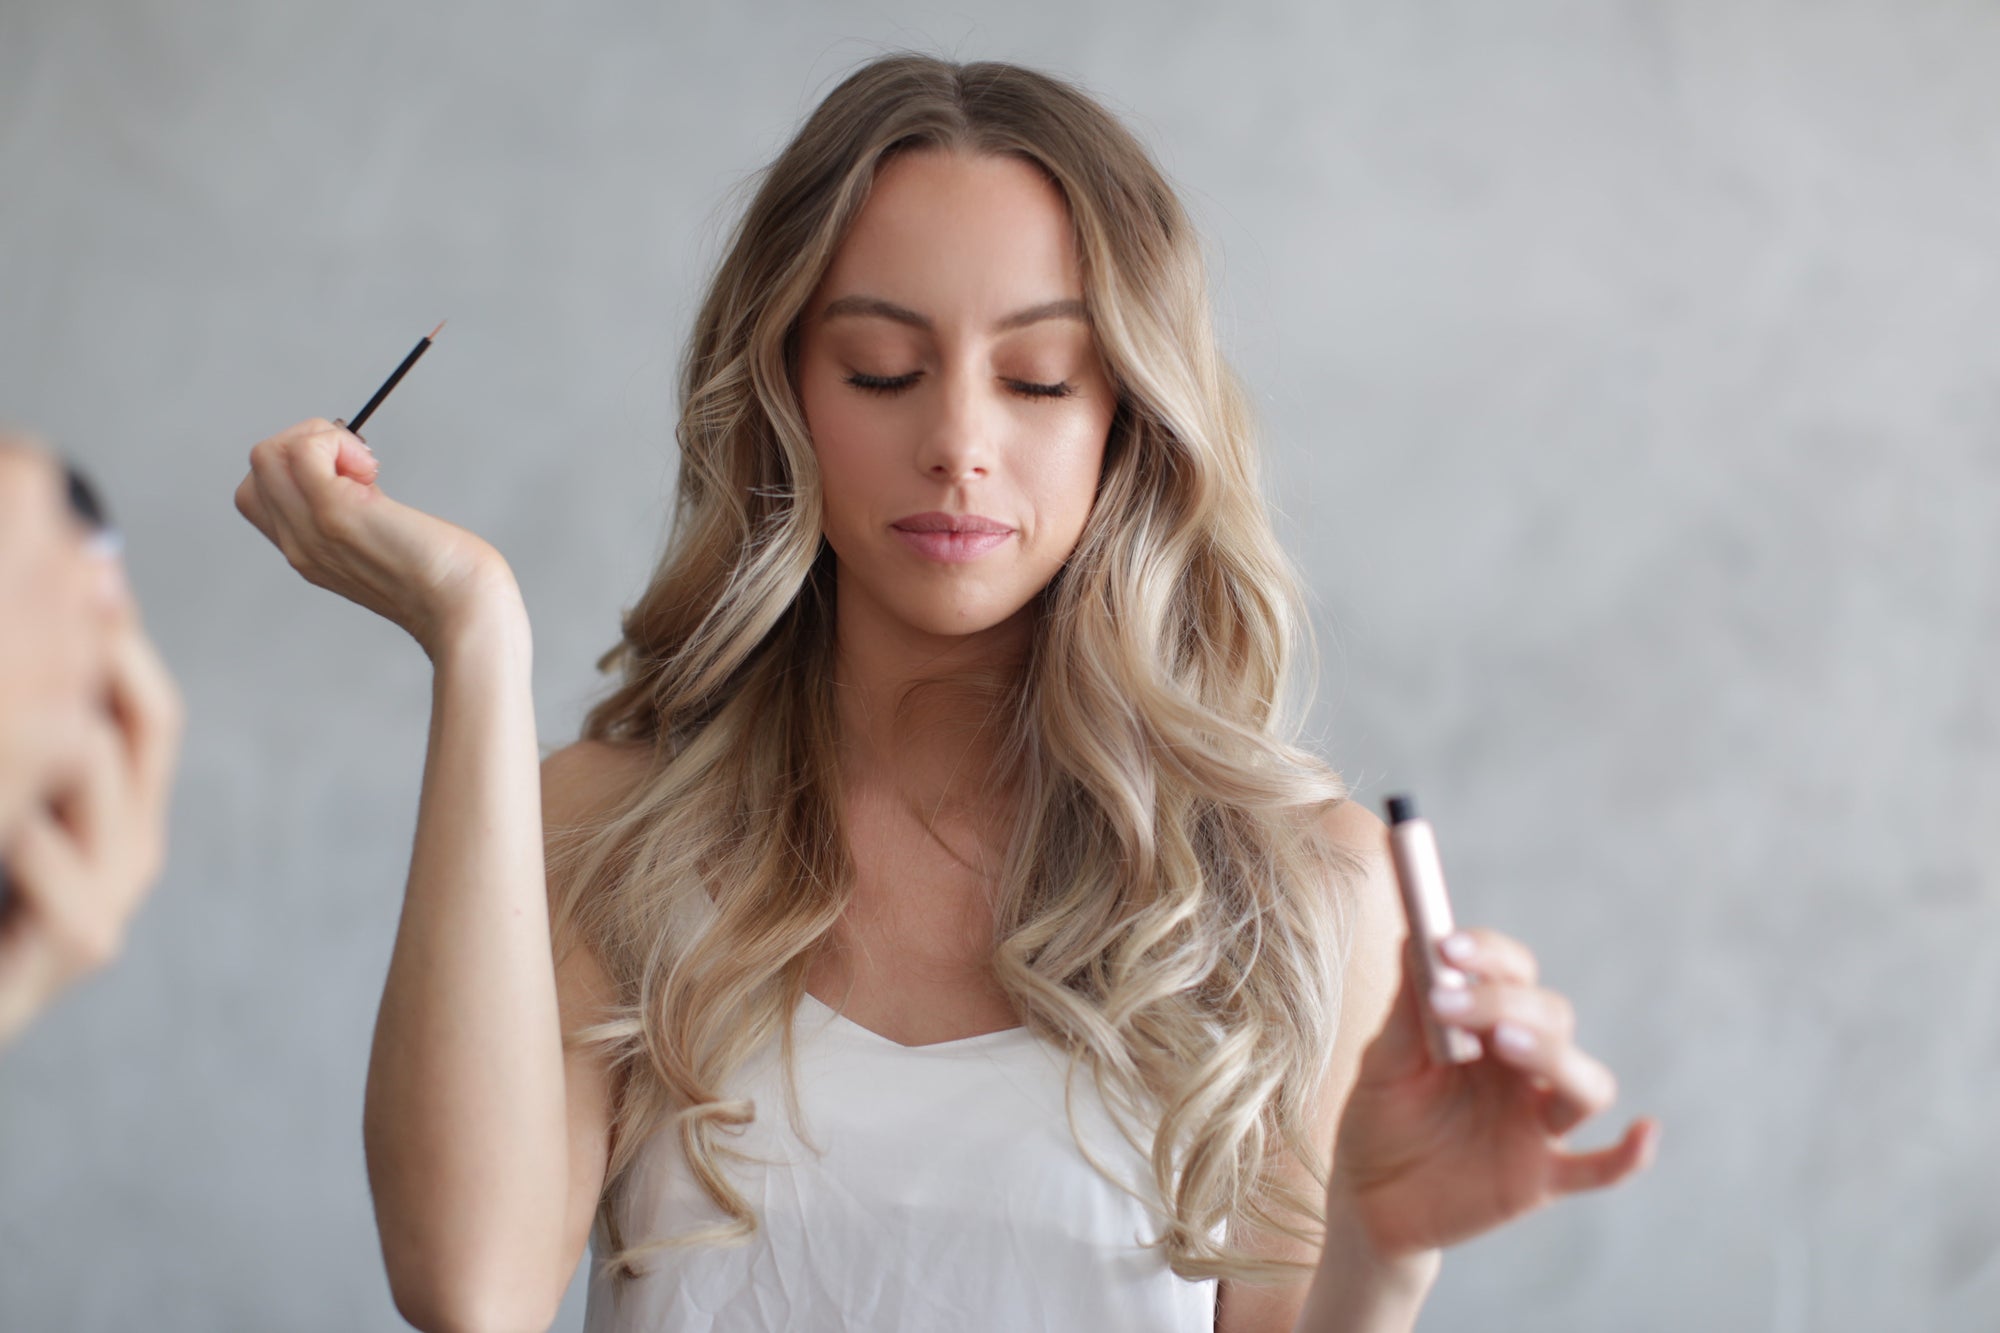 Eyelash Tools That Are a Total Game Changer